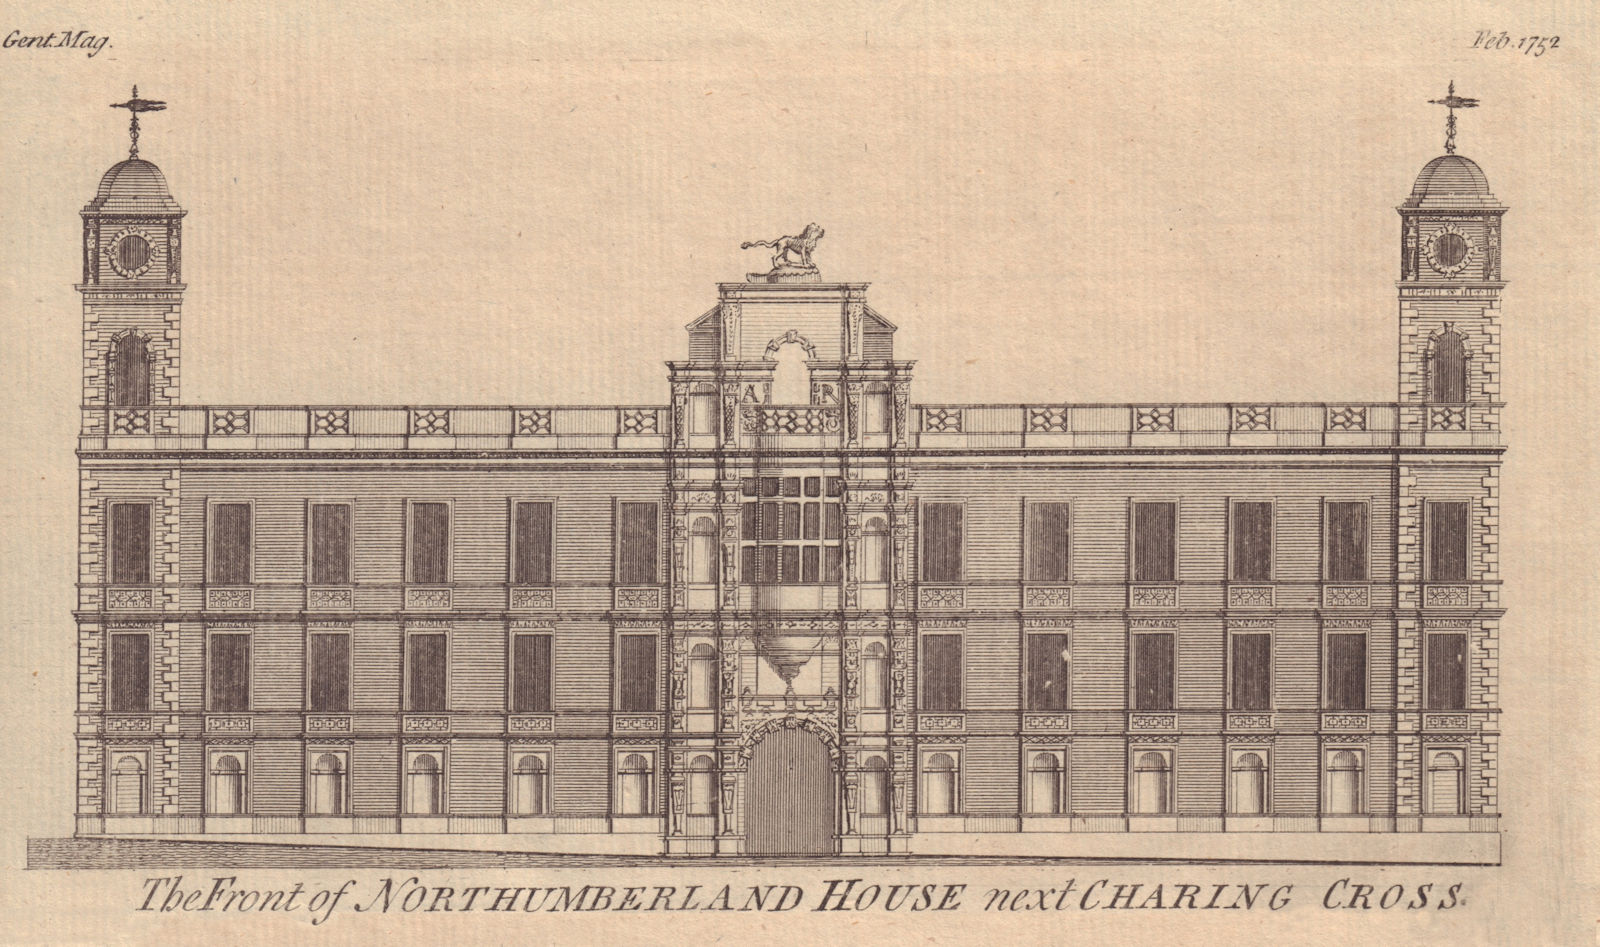 Associate Product The Front of Northumberland House next Charing Cross. London 1752 old print